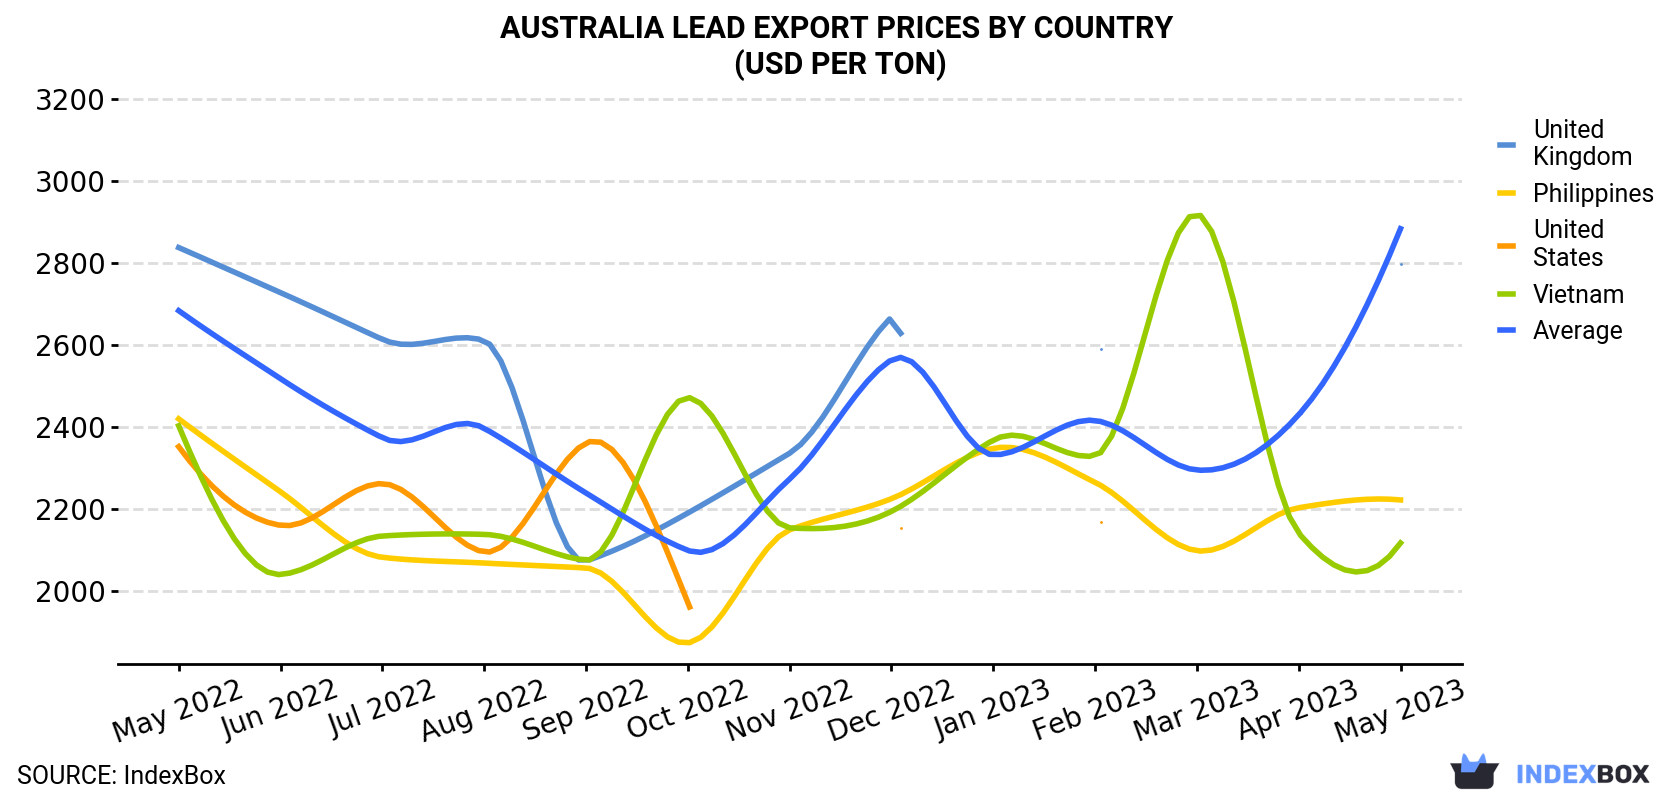 Australia Lead Export Prices By Country (USD Per Ton)